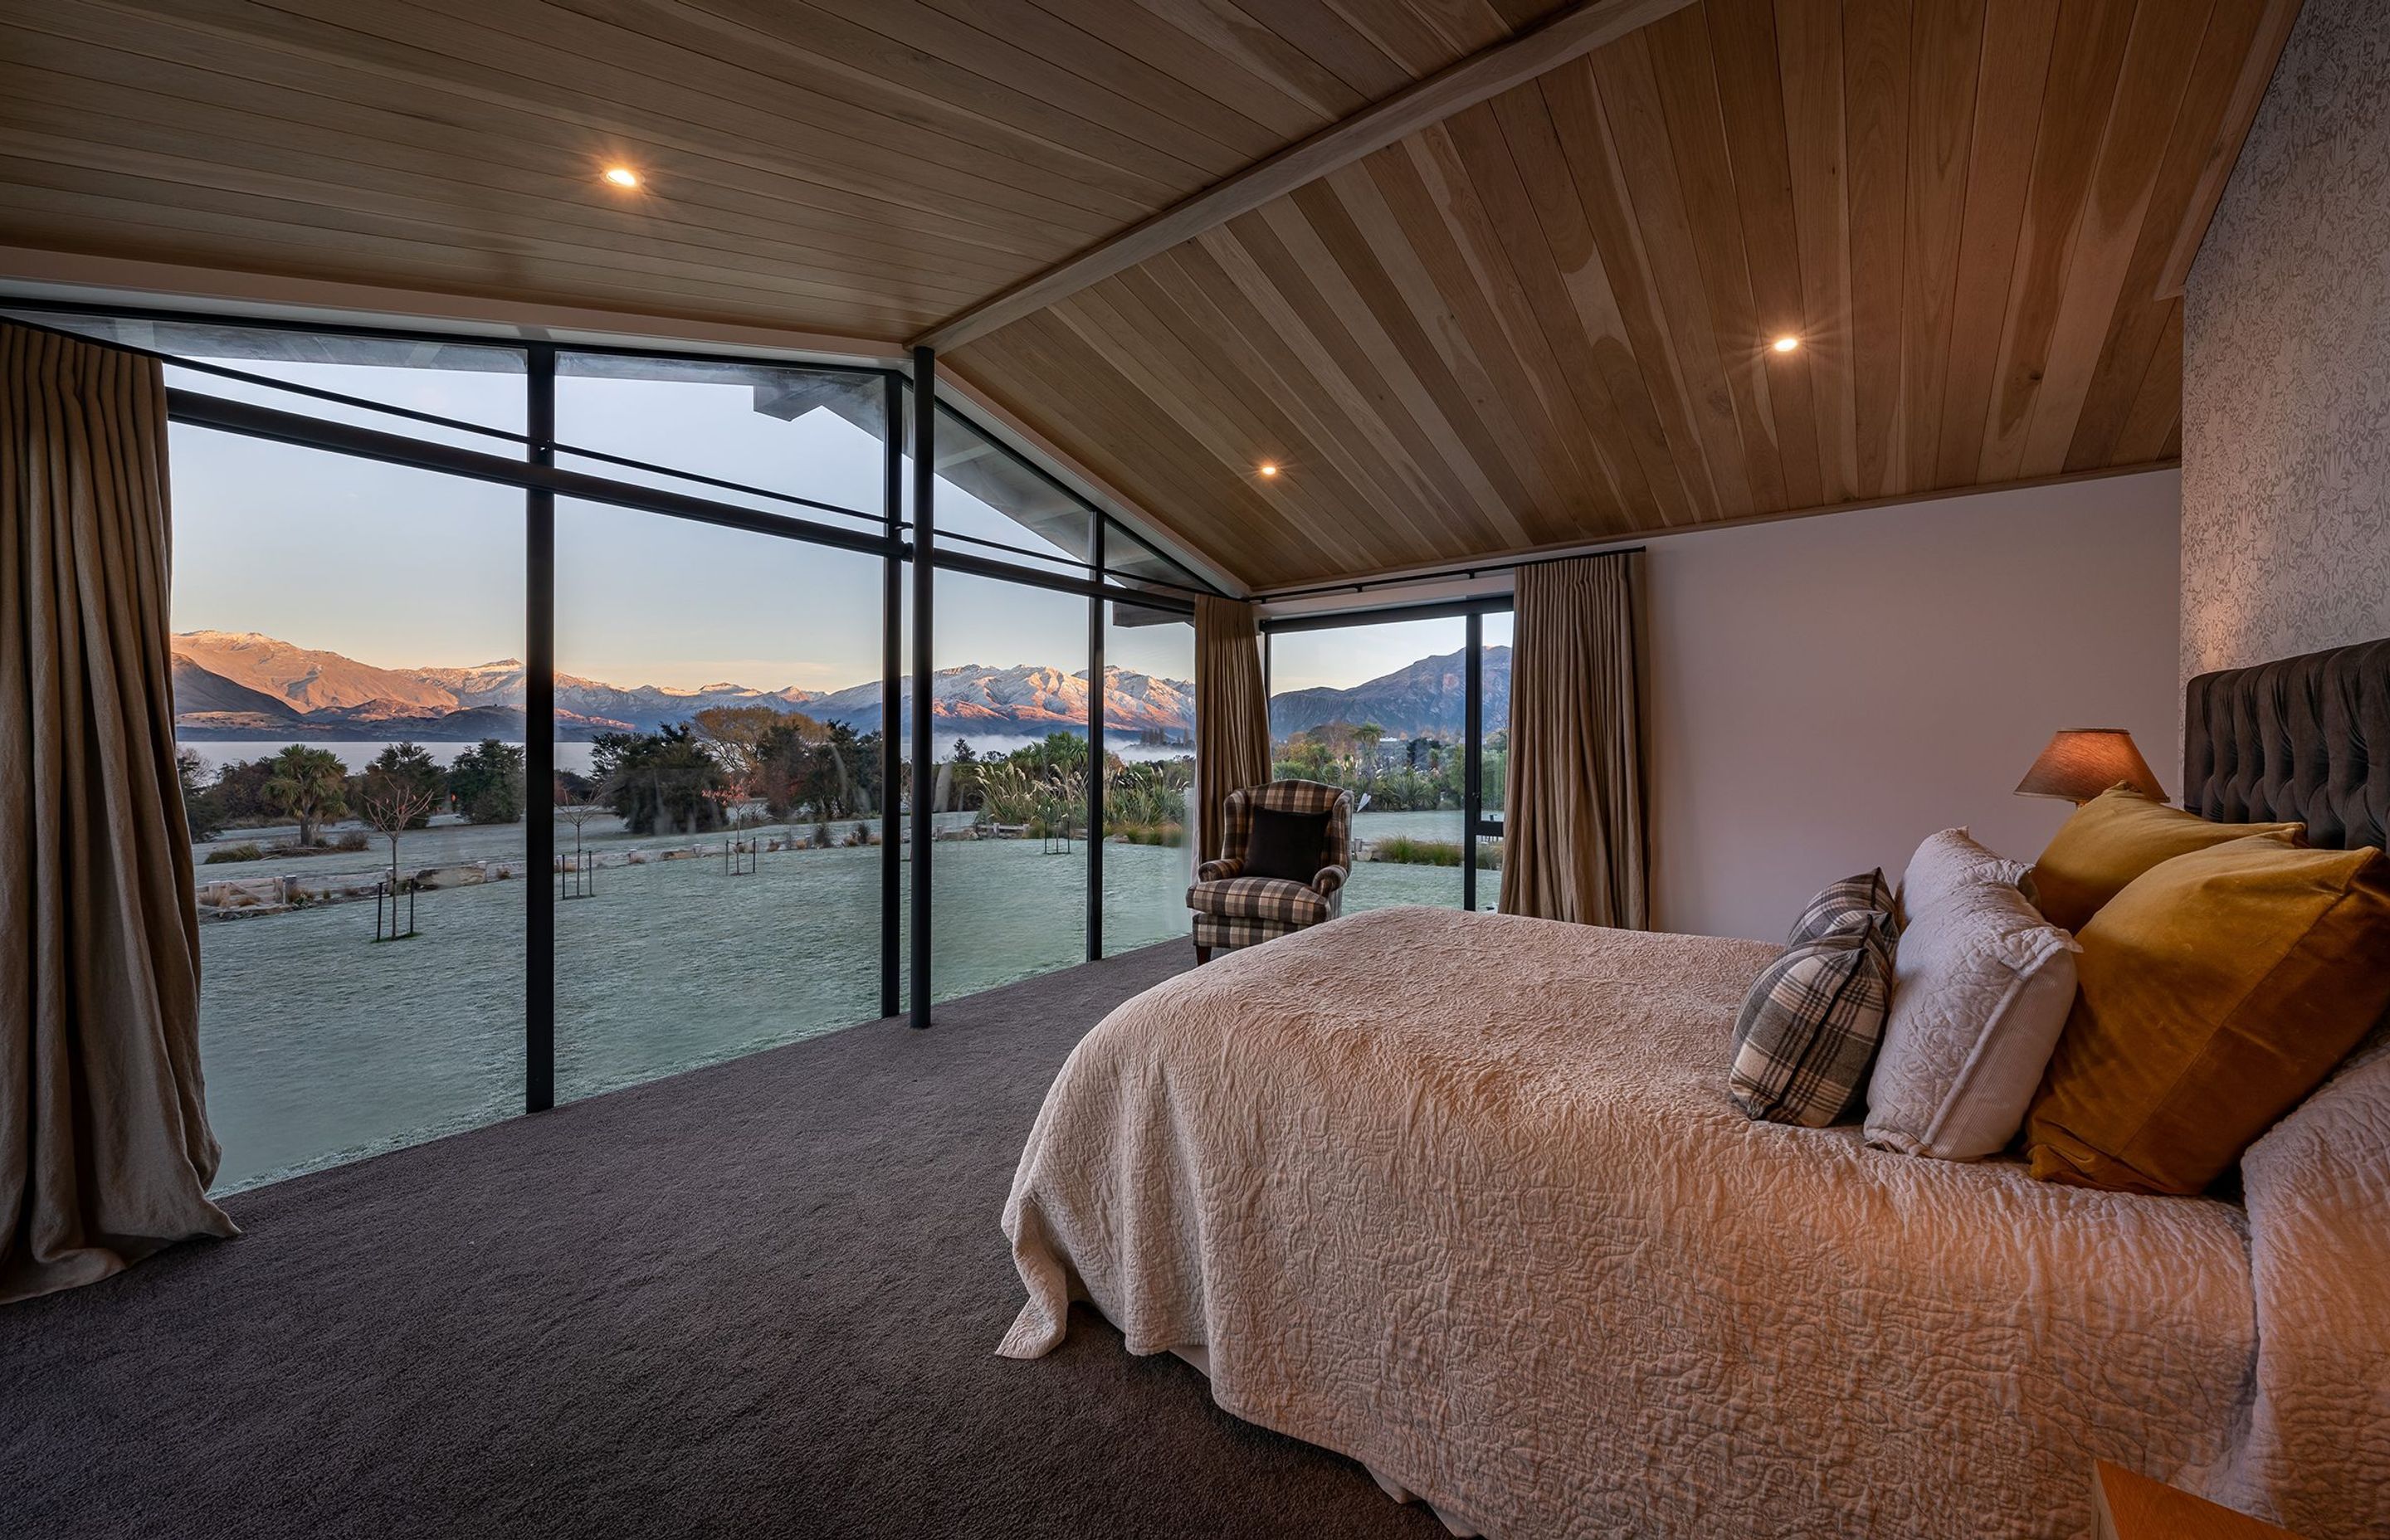 The main bedroom is situated in the adjoining pavilion and has a grandstand view of the lake and mountain range.